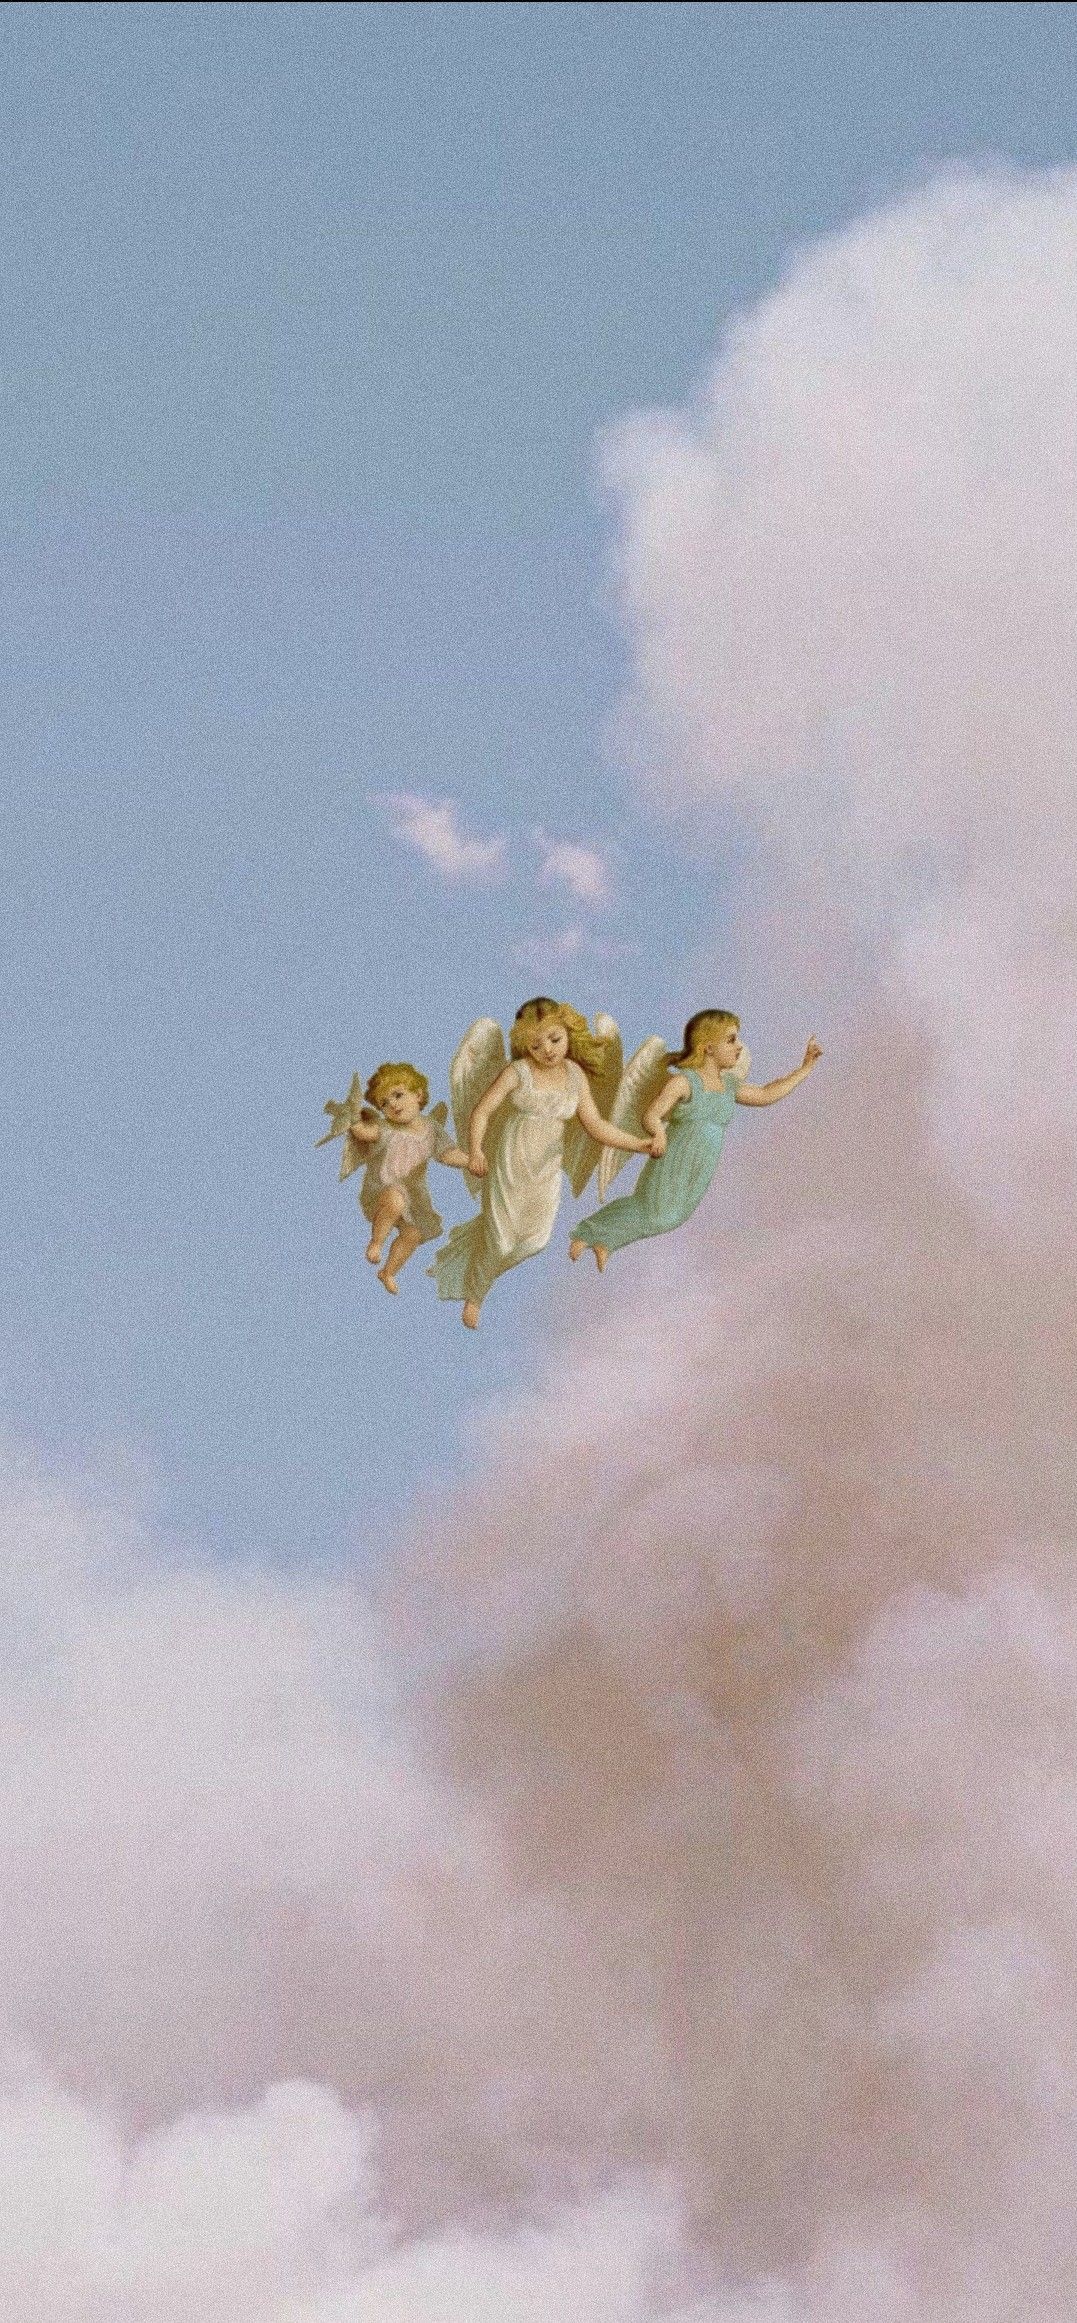 A group of angels flying in the sky - Angels, Cupid